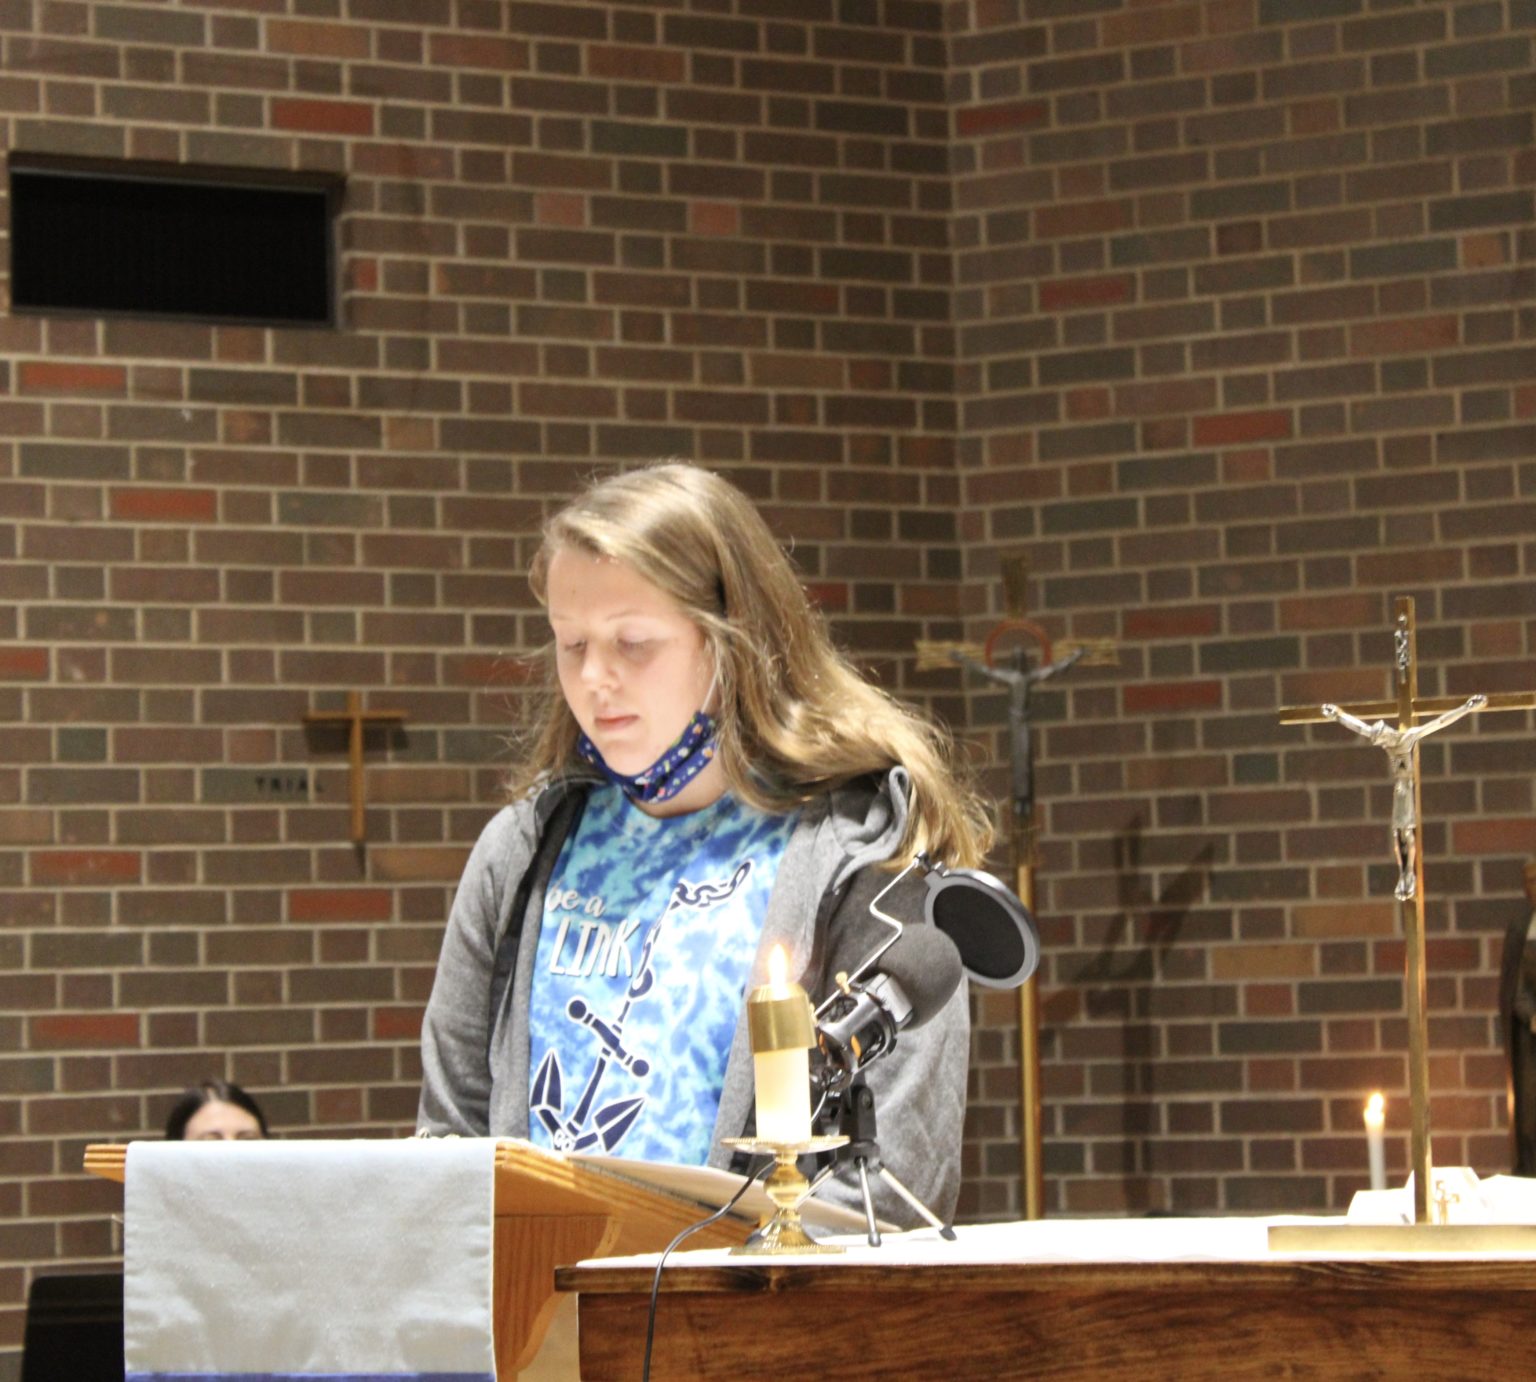 CBA Celebrates The Feast Of The Immaculate Conception near syracuse ny image of student reading